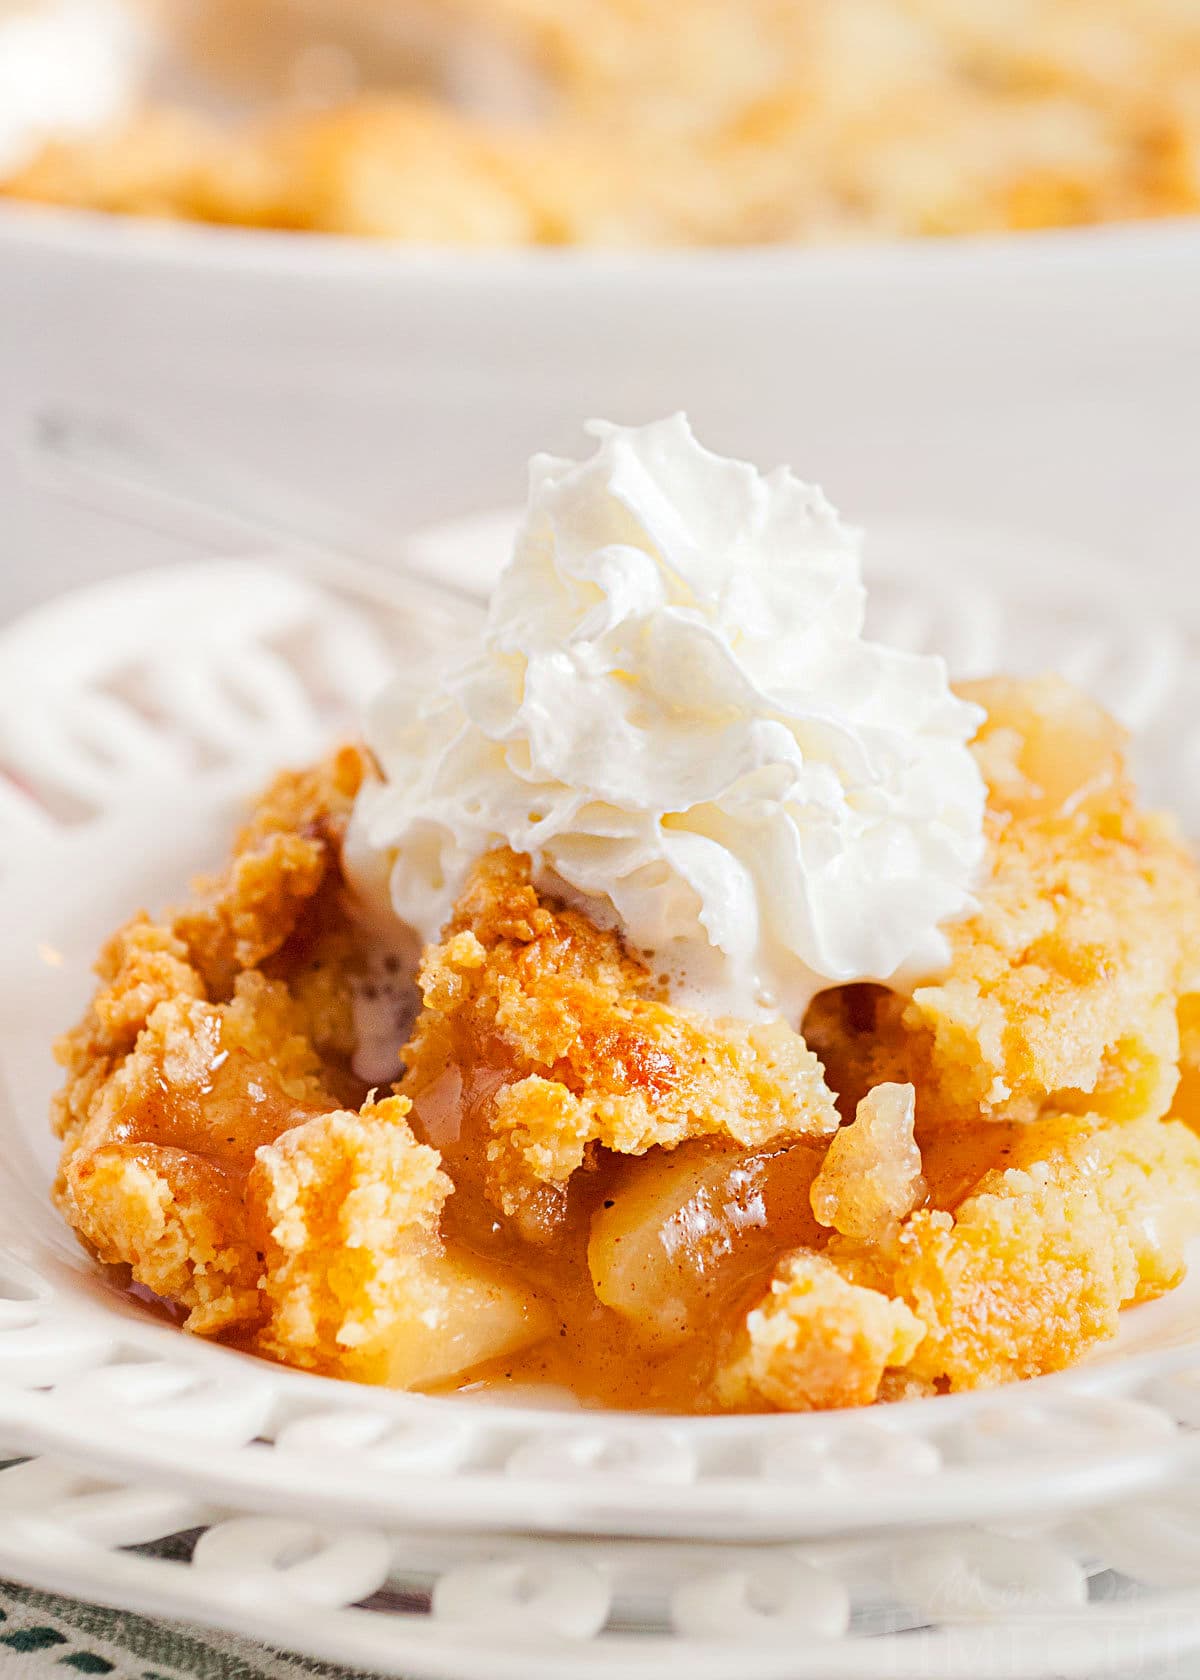 scoop of apple cobbler served on a white lace edged plate topped with fresh whipped cream. white casserole dish with remaining cobbler in the background.